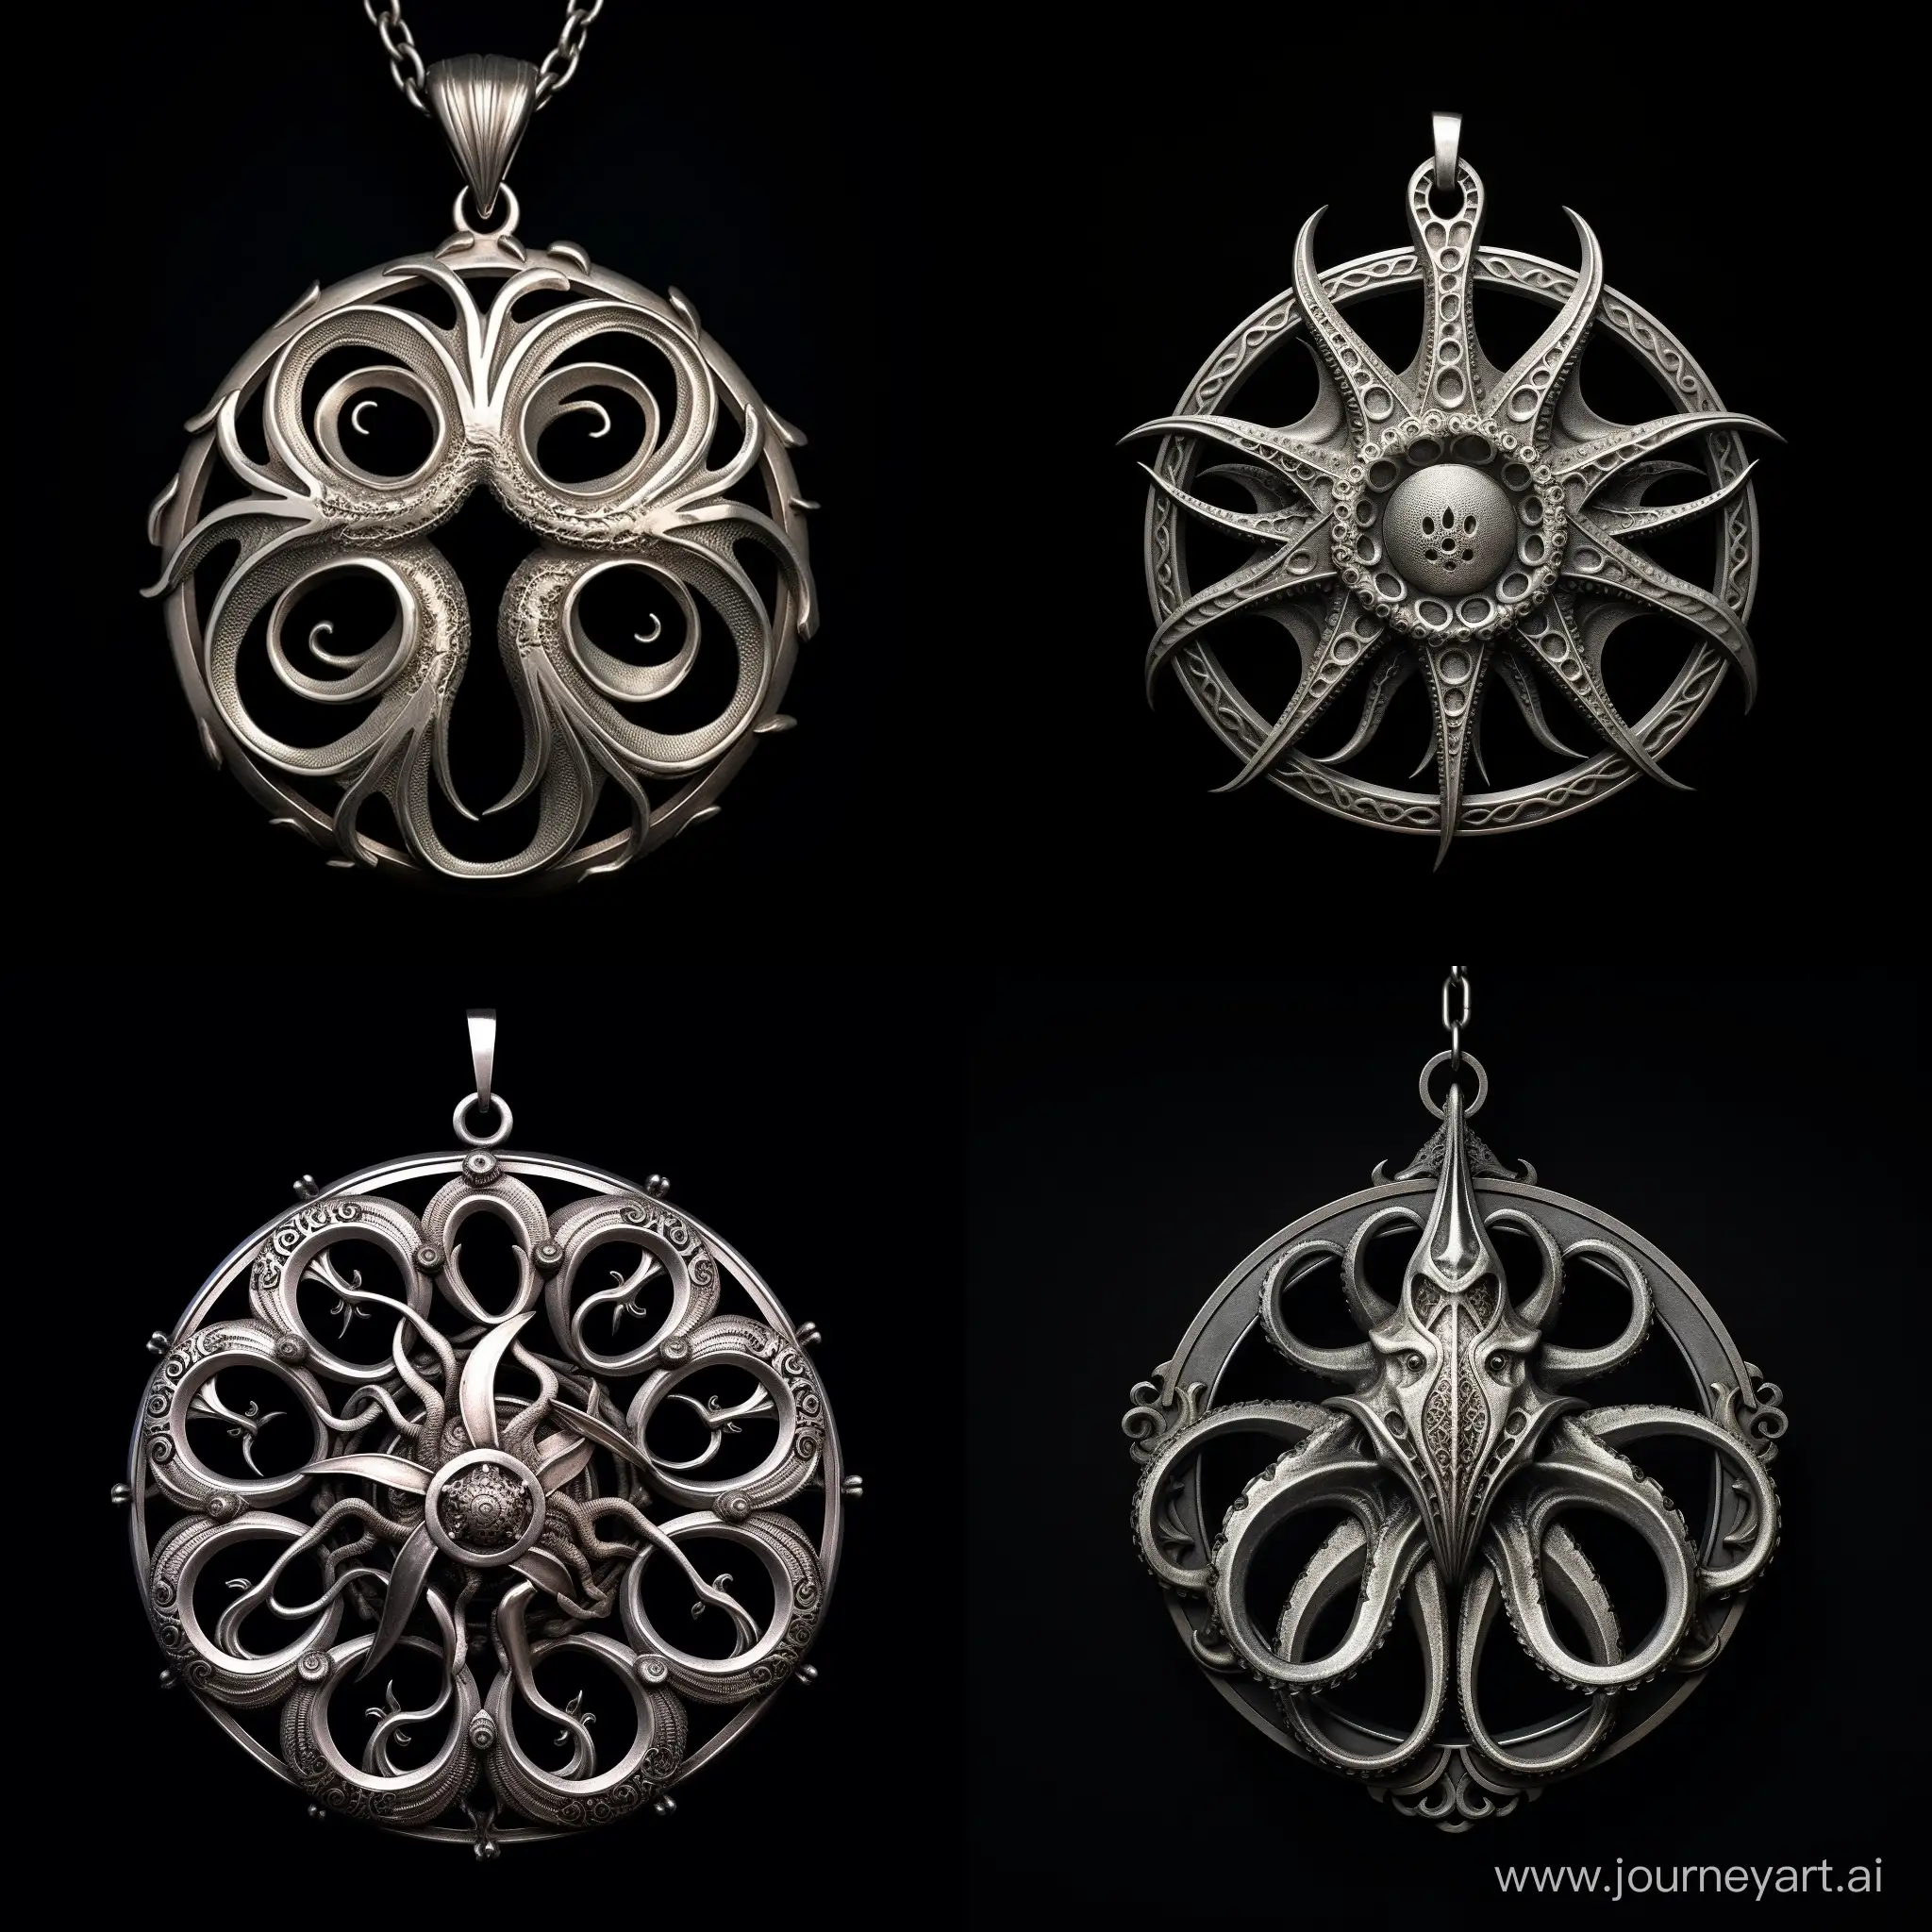 Full silver pendant in the shape of a wheel on fire,
the center of the pendant is a pattern of intertwined legs, octopus tentacles and a fish silhouette.